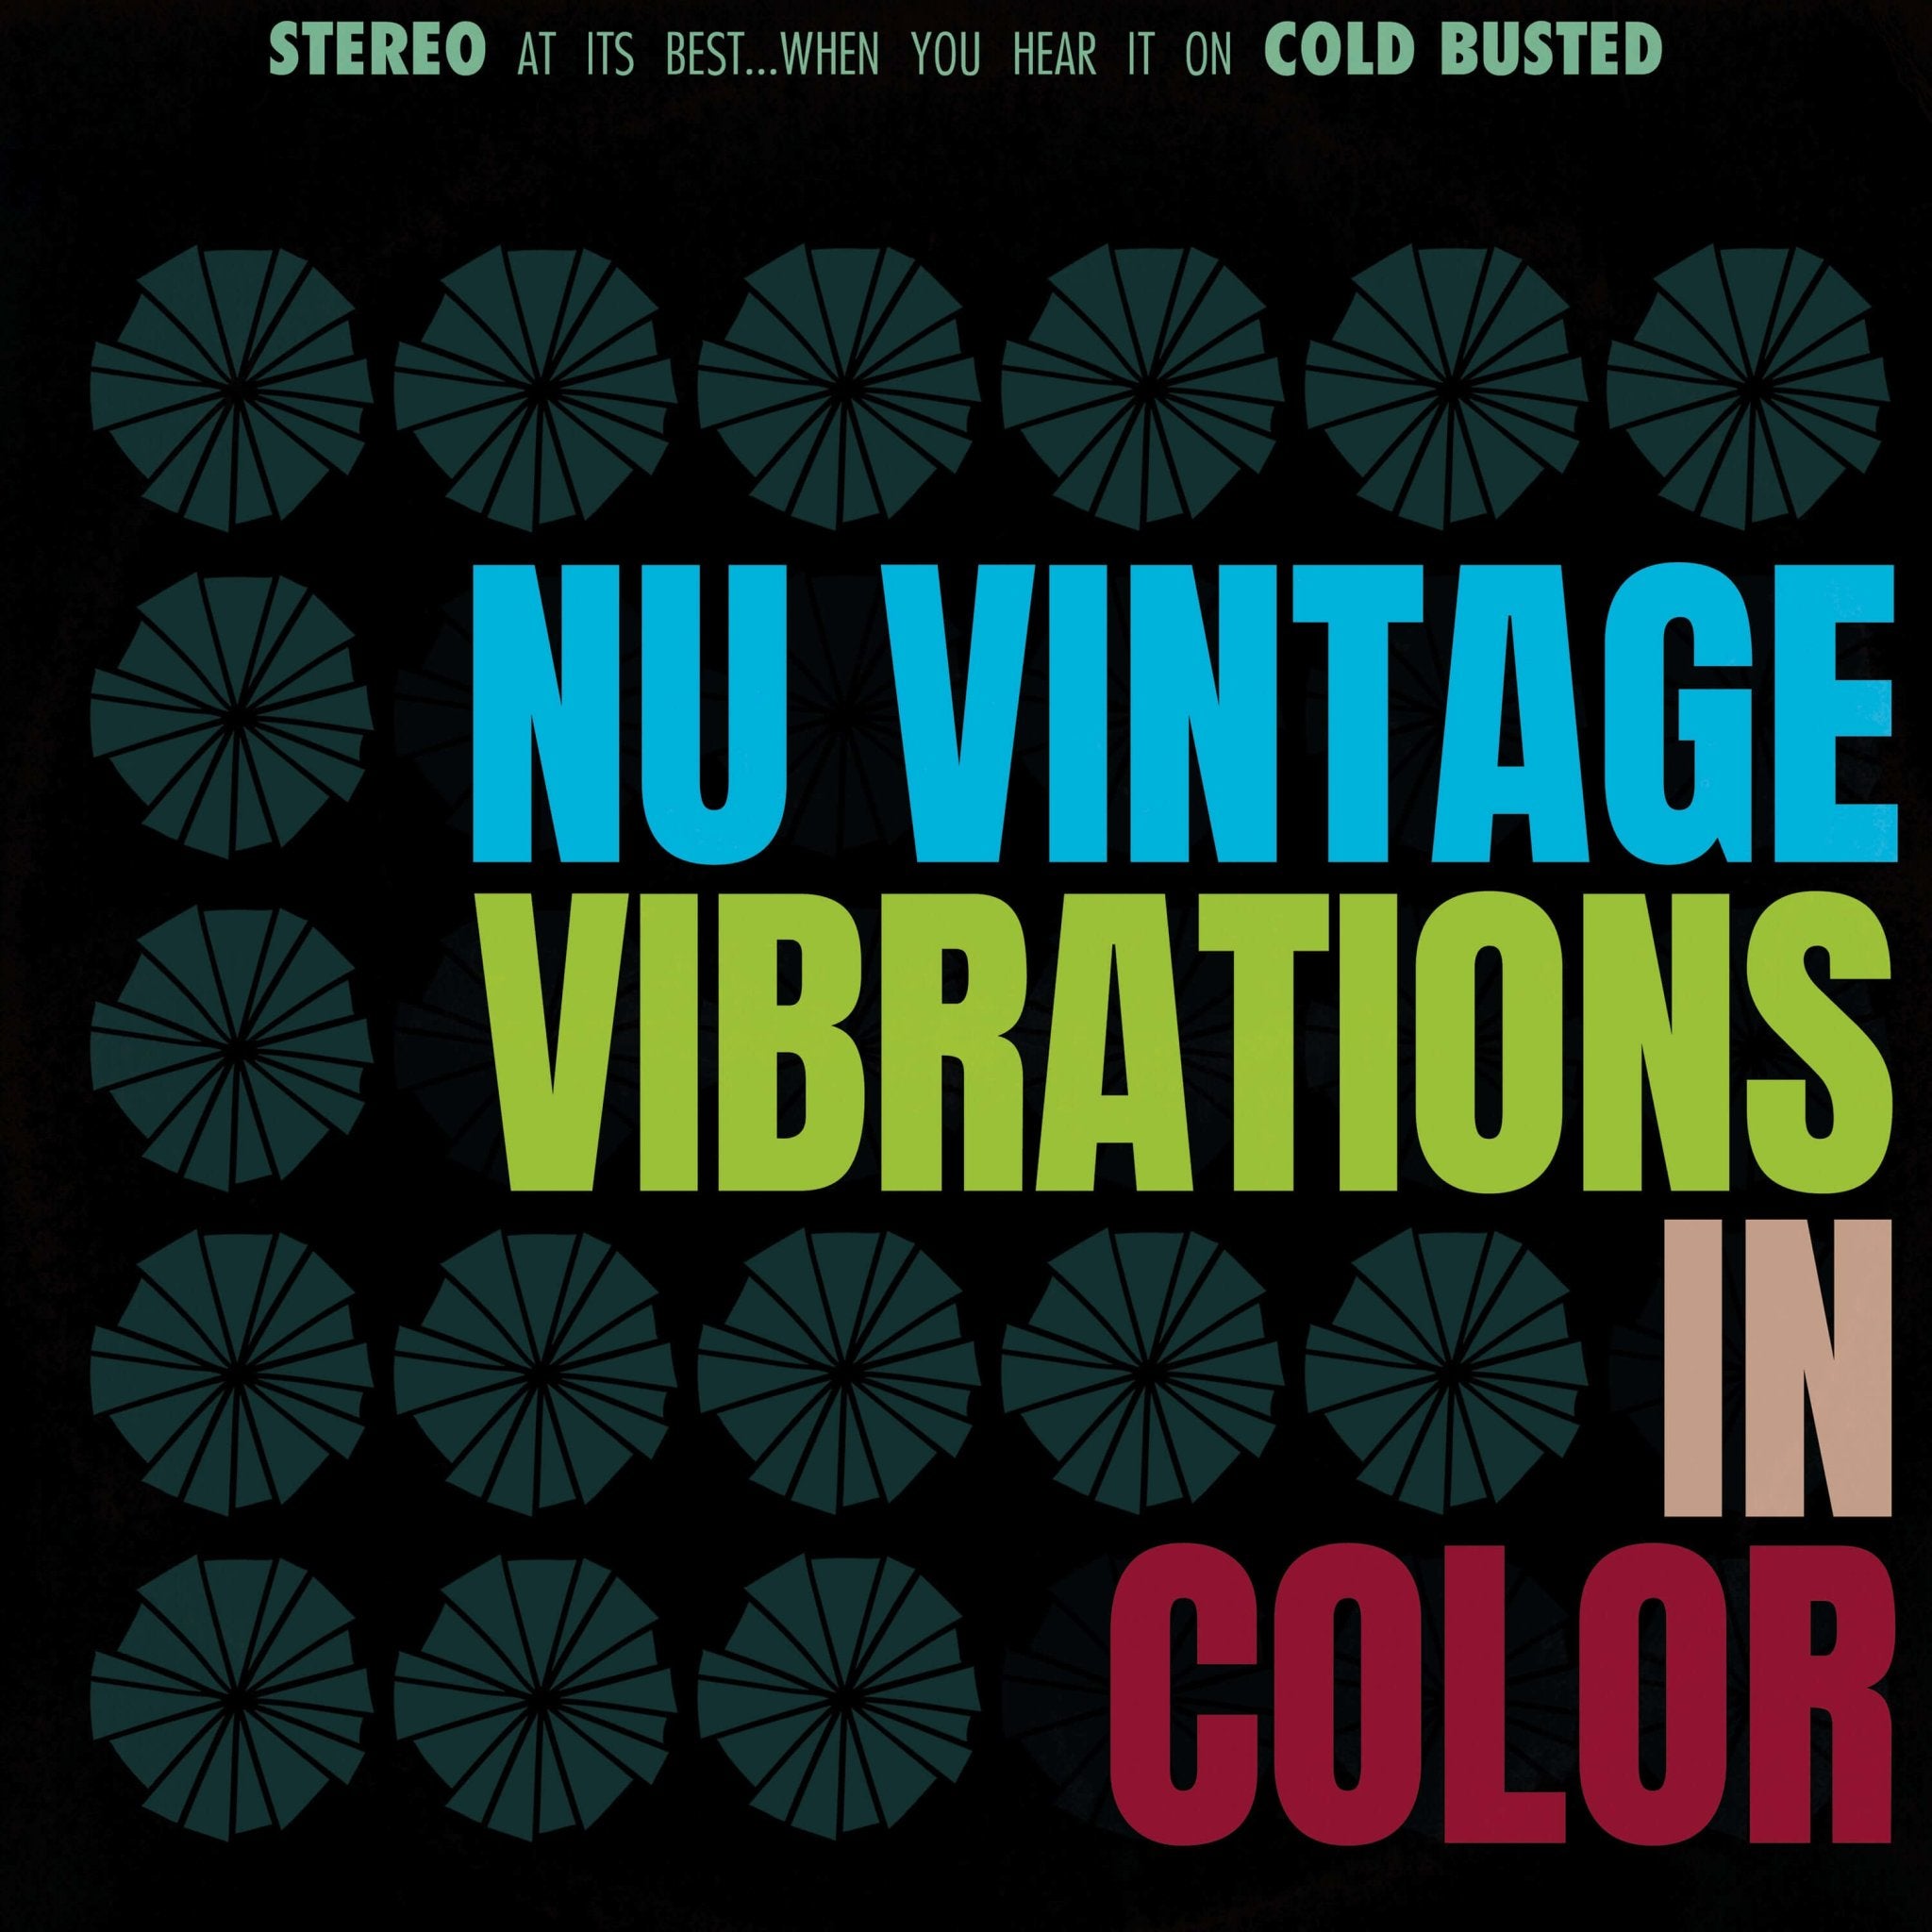 Nu Vintage - Vibrations In Color - PRE-ORDER: Limited Edition Transparent Fluorescent Green 12 Inch Vinyl - Cold Busted